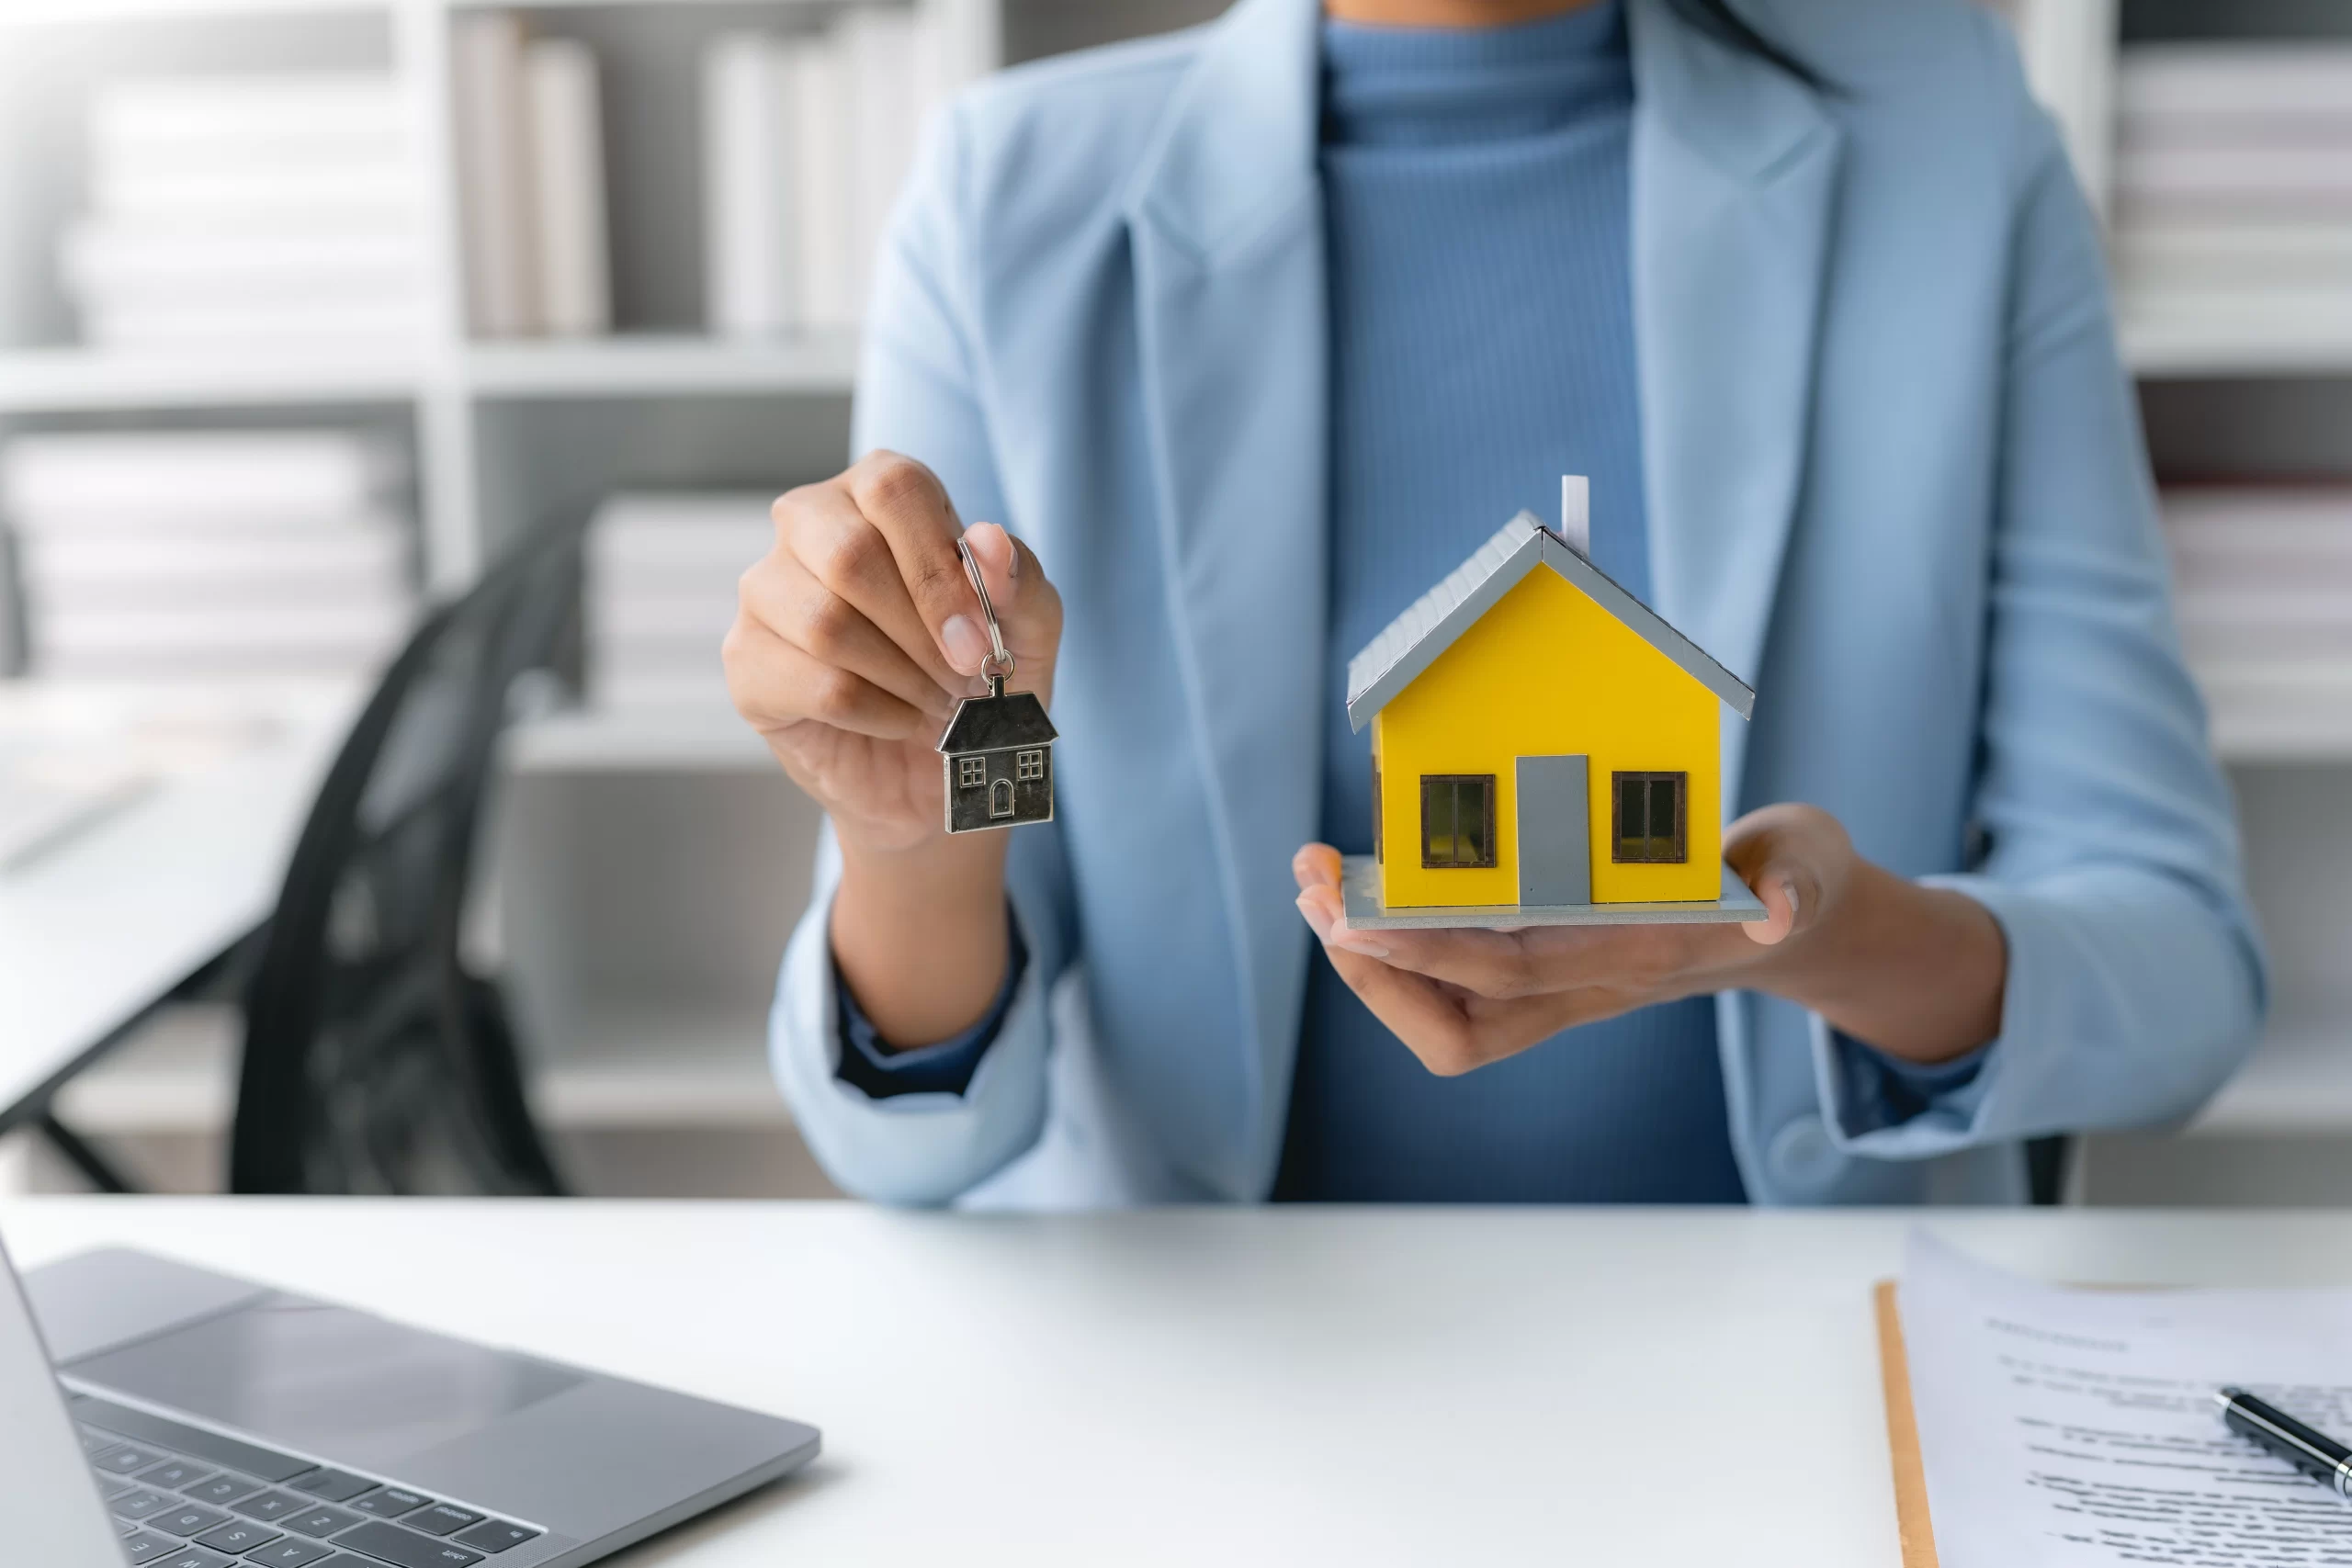 female-employee- holding a yellow house model offering-domestic package-to-client-